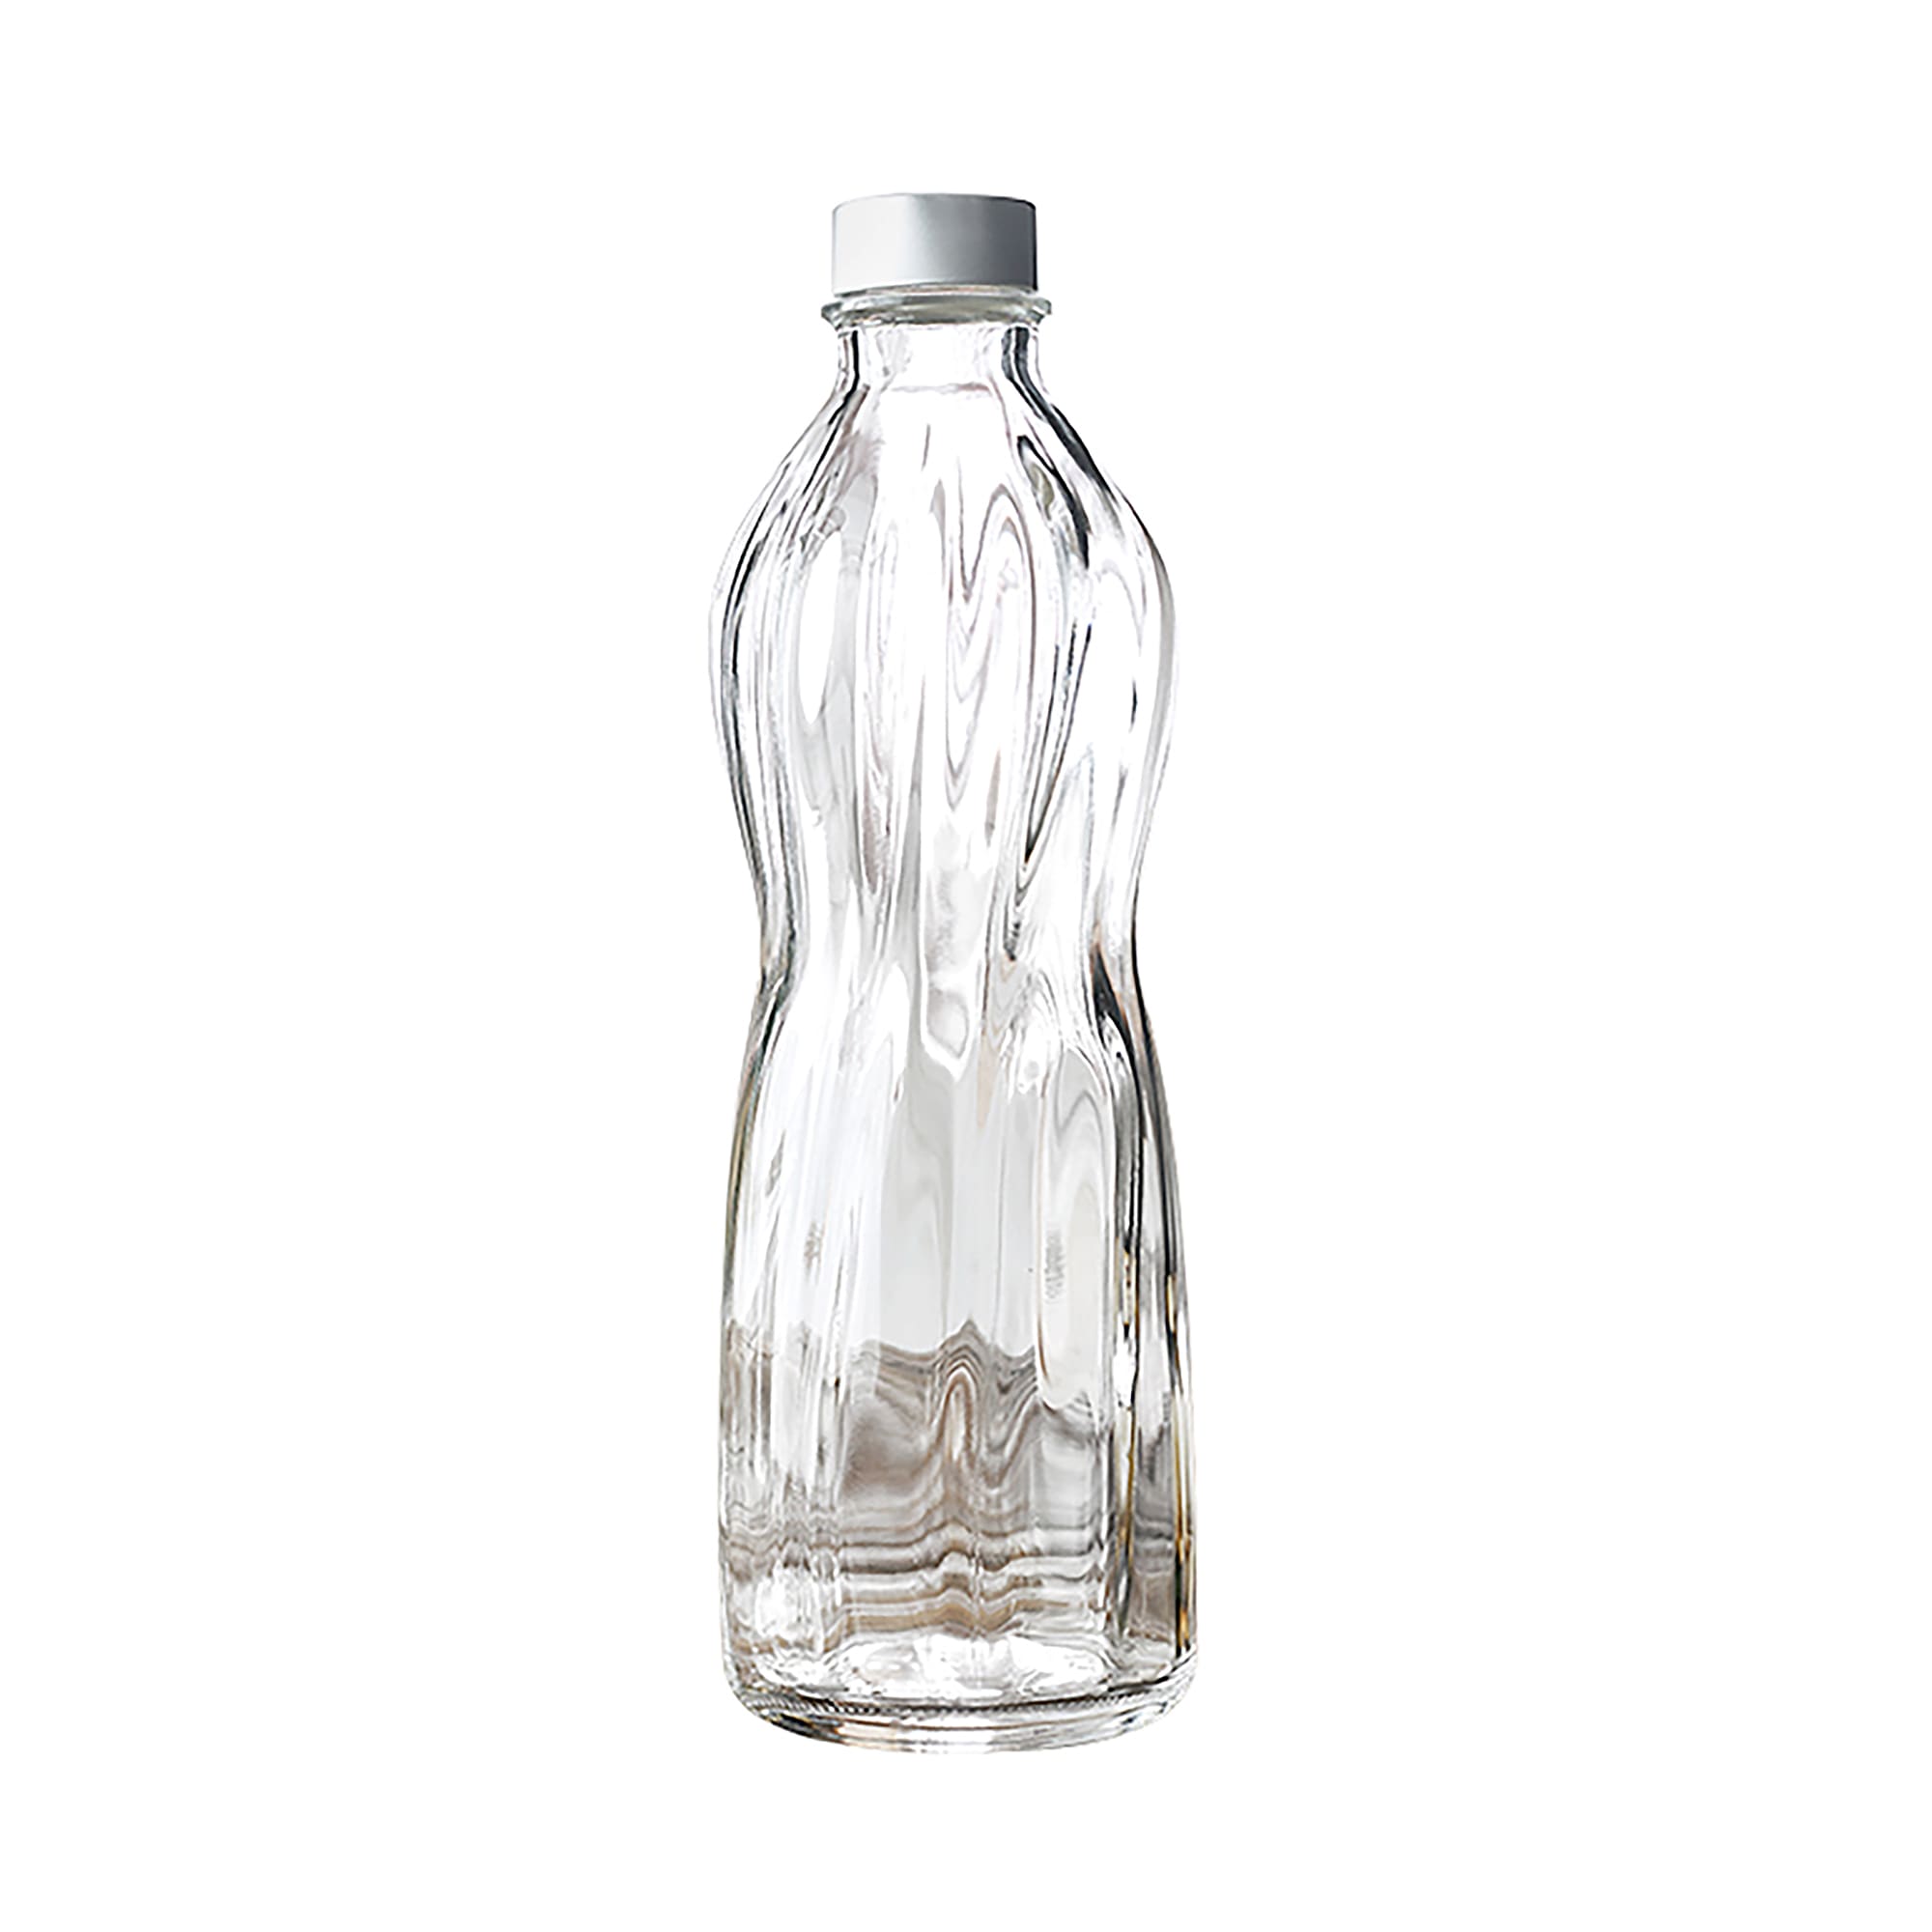 Wine/Juice Decanter, 1 L, Clear, Polycarbonate, With Lid, G.E.T.  BW-1100-PC-CL